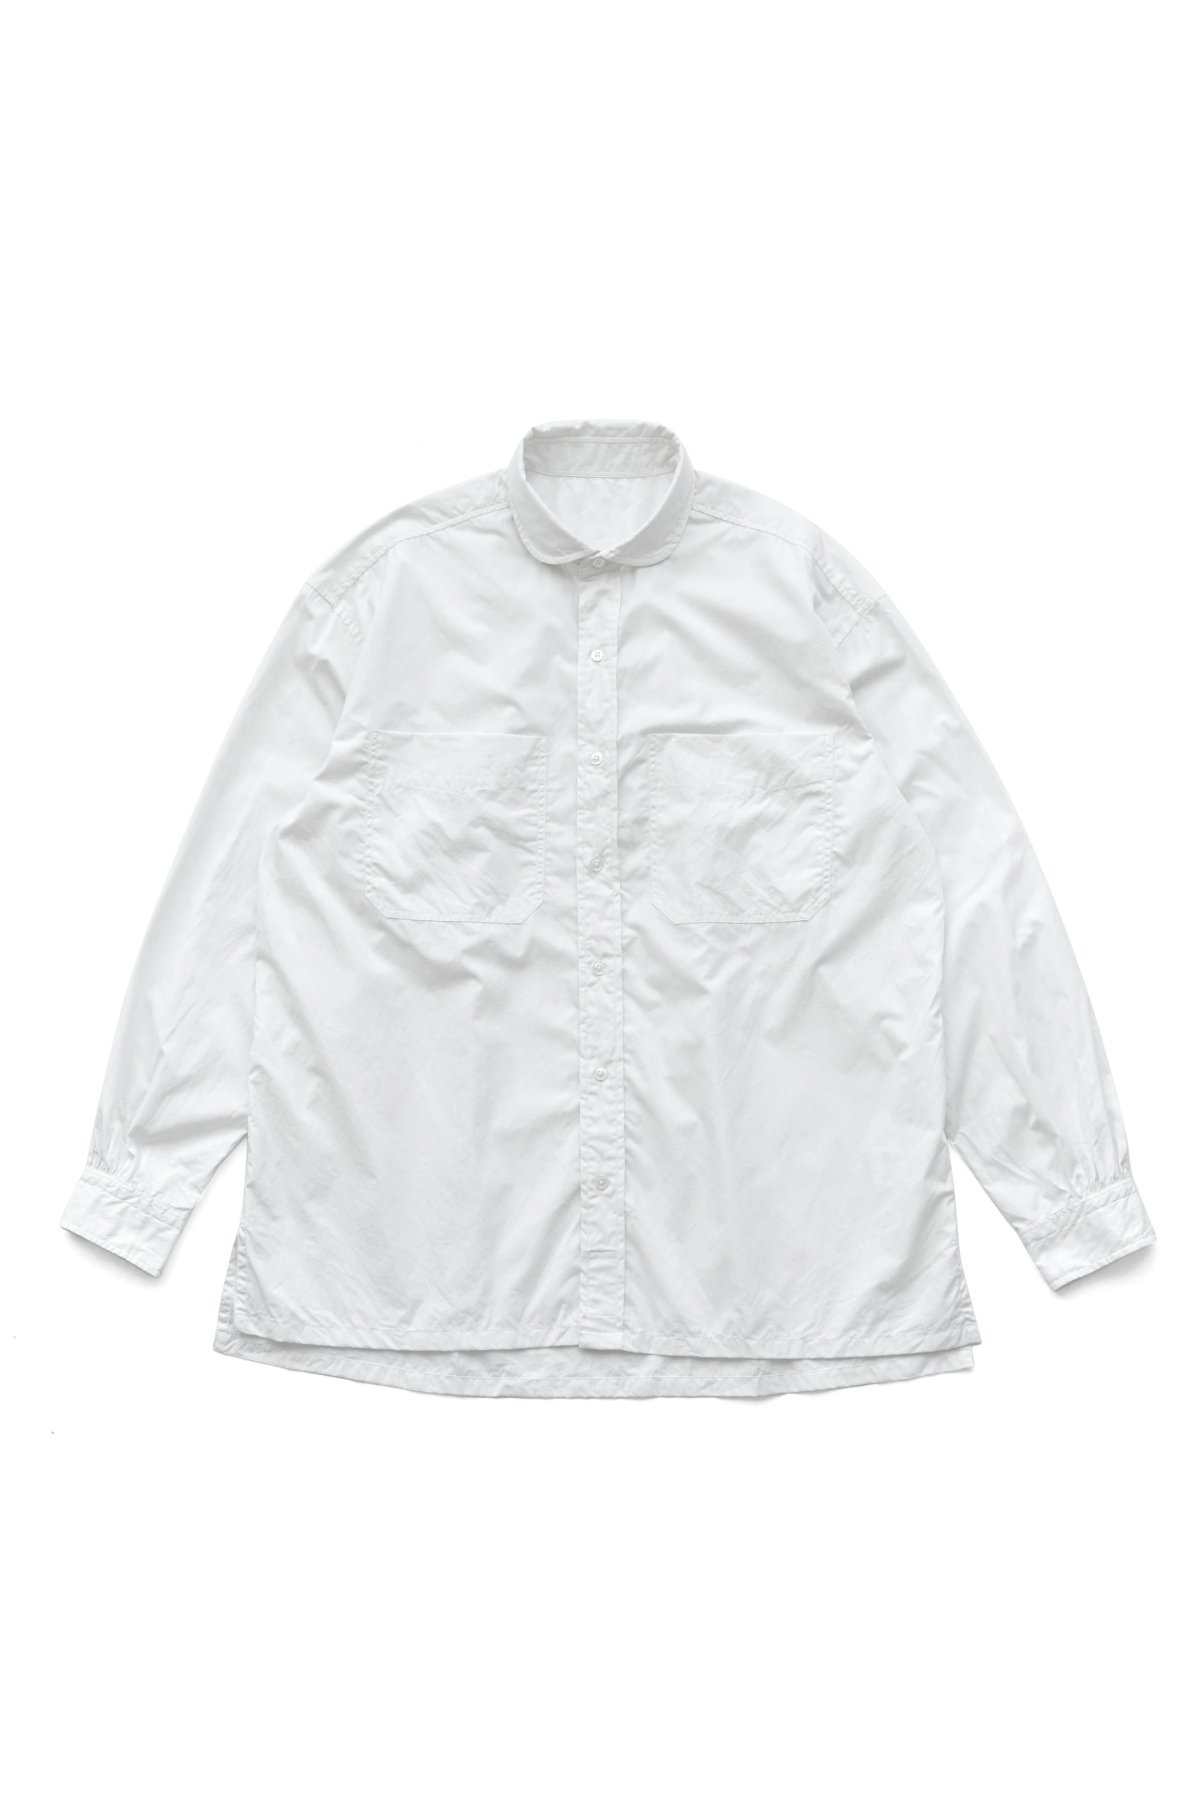 HOTOUCH White Button Down Shirt Women V Neck Collared Long Sleeve